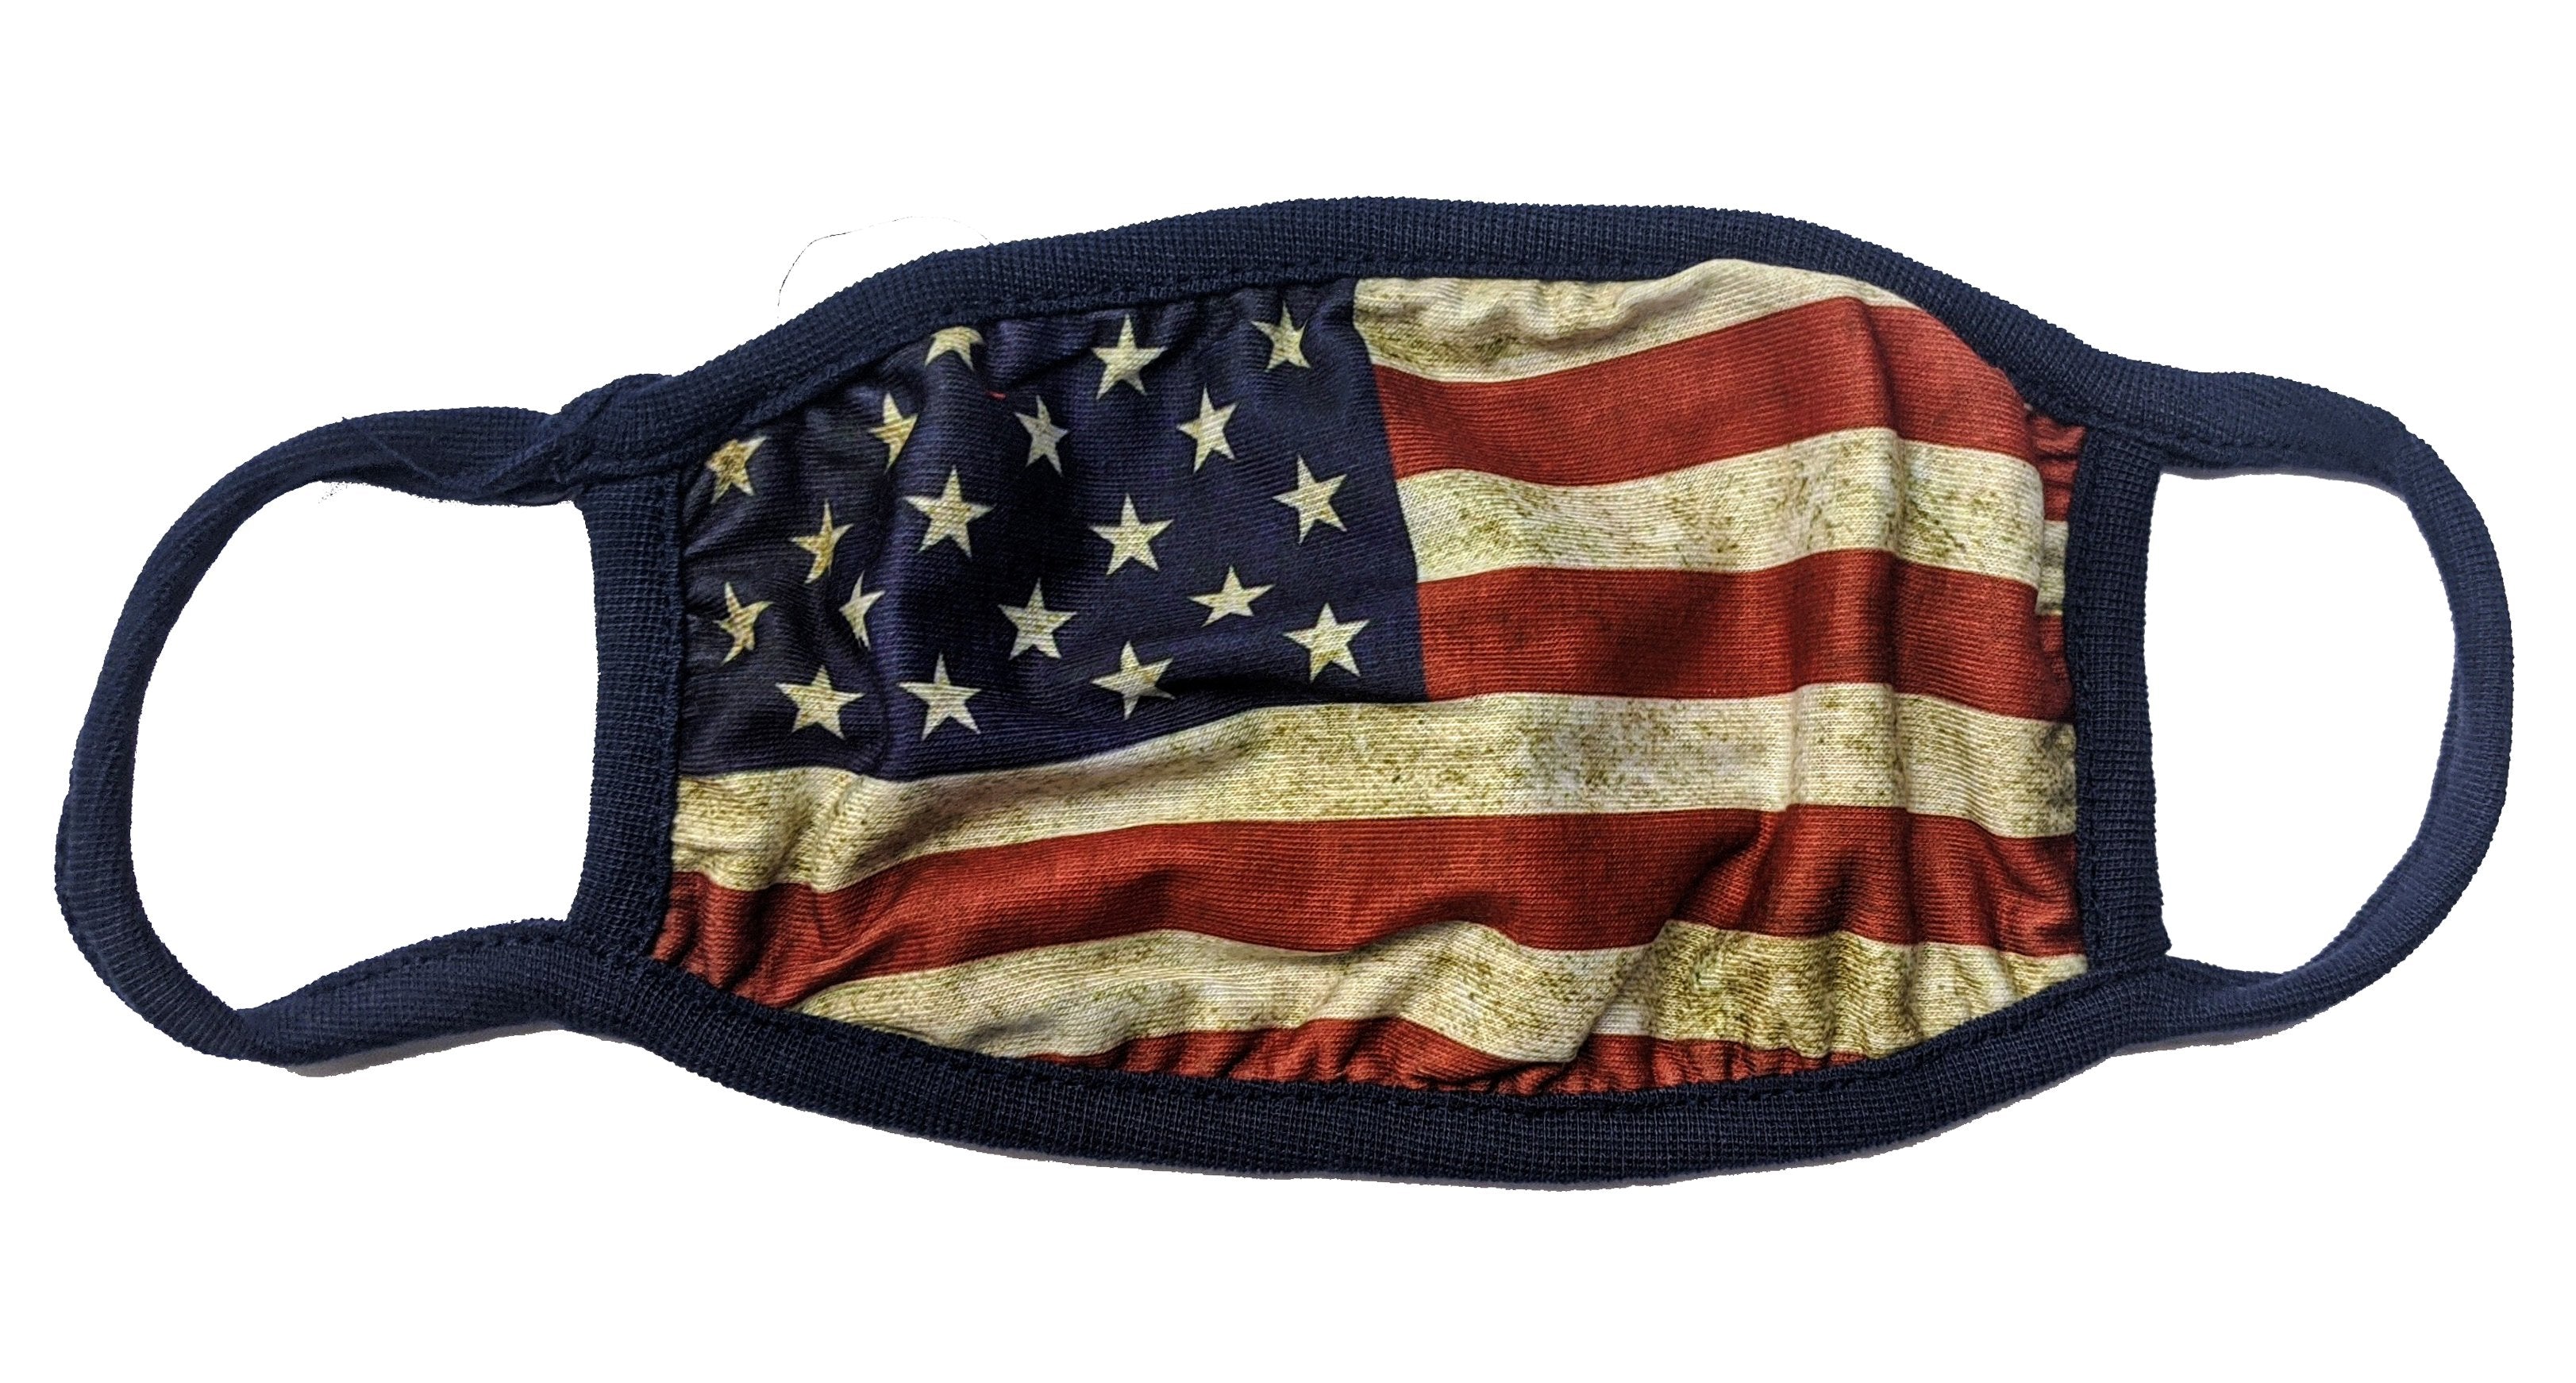 USA Distressed Flag Face Mask Adult Unisex Non Medical Cotton & Polyester